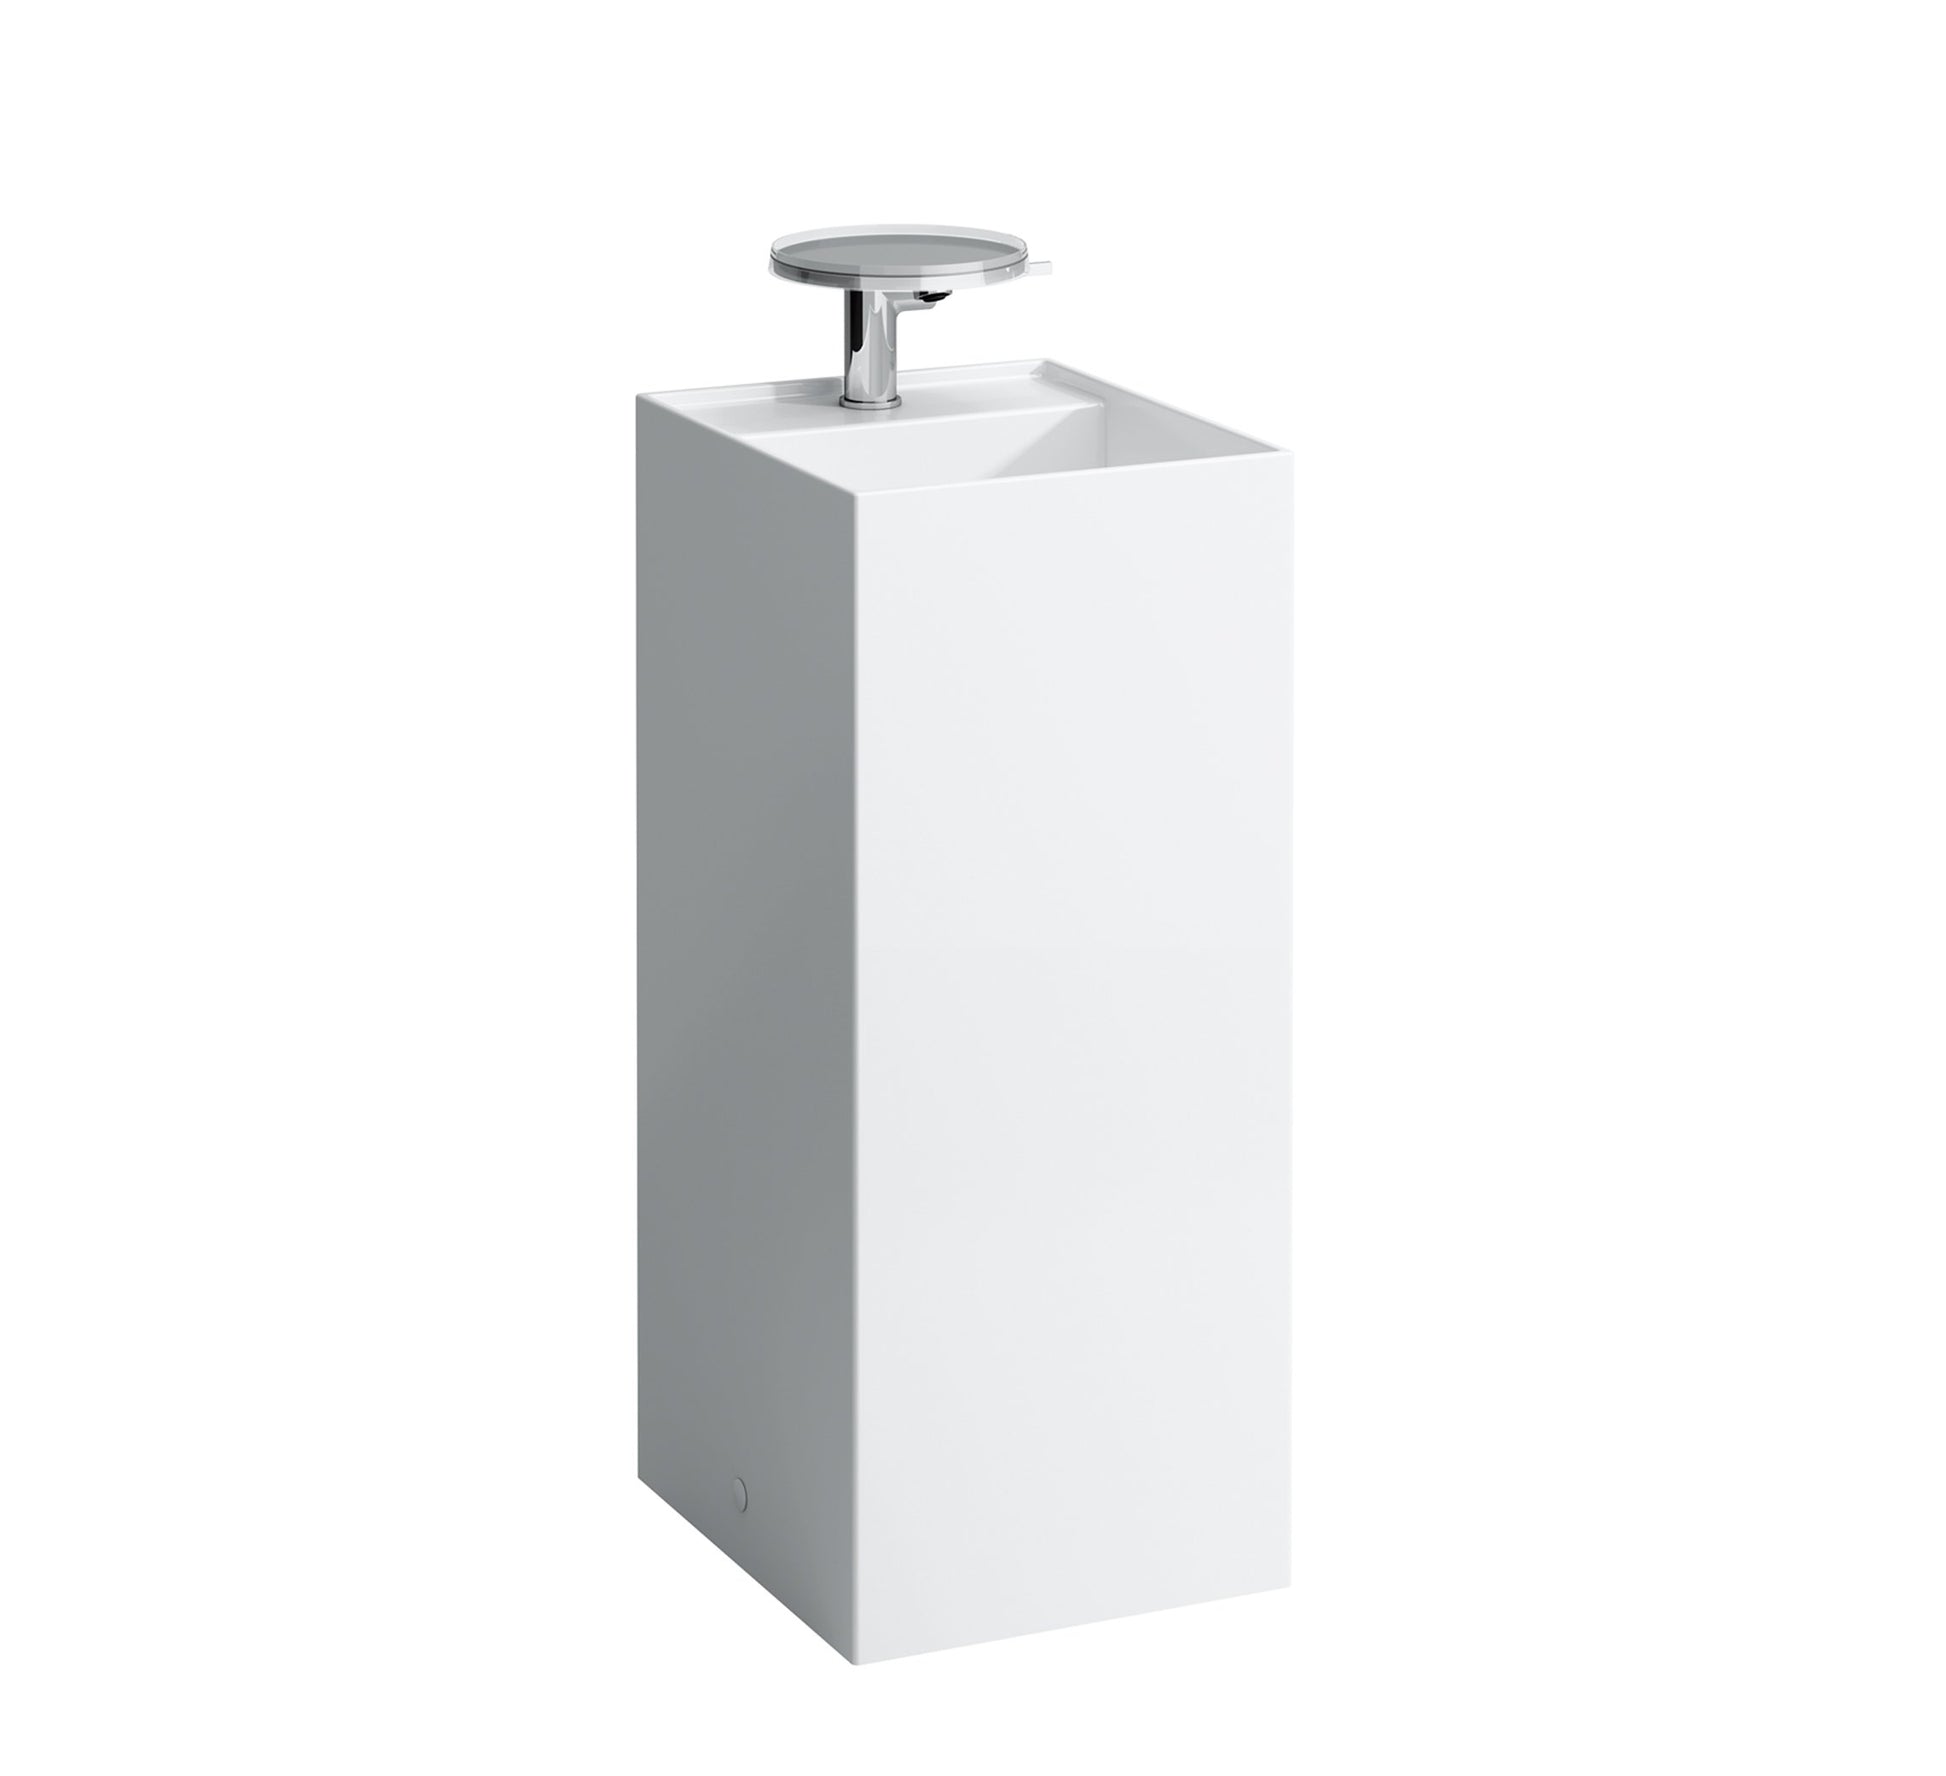 LAUFEN KARTELL FREESTANDING WASHBASIN, WITH INTEGRATED PEDESTAL AND FIXING DEVICE, ONE TAPHOLE, WITHOUT OVERFLOW HOLE INCLUDING FIXED OPEN WASTE VALVE 375 X 435 X 900 MM WHITE SAPHIRKERAMIK - 8.1133.1.000.111.1 - Tadmur Trading